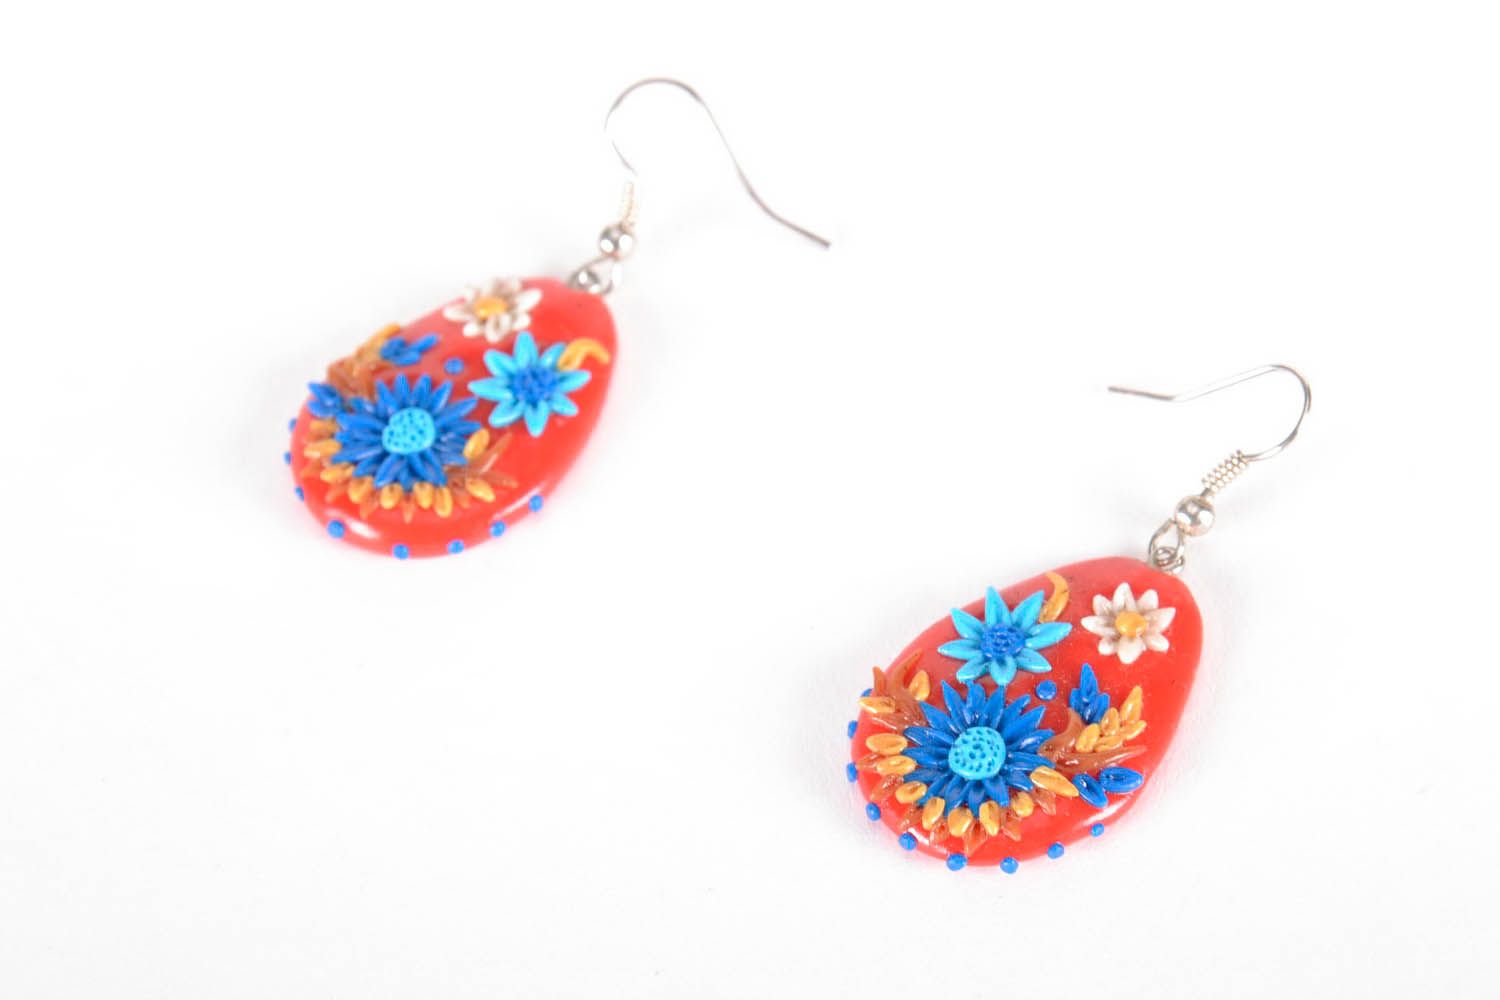 Bright earrings made using filigree technique photo 1